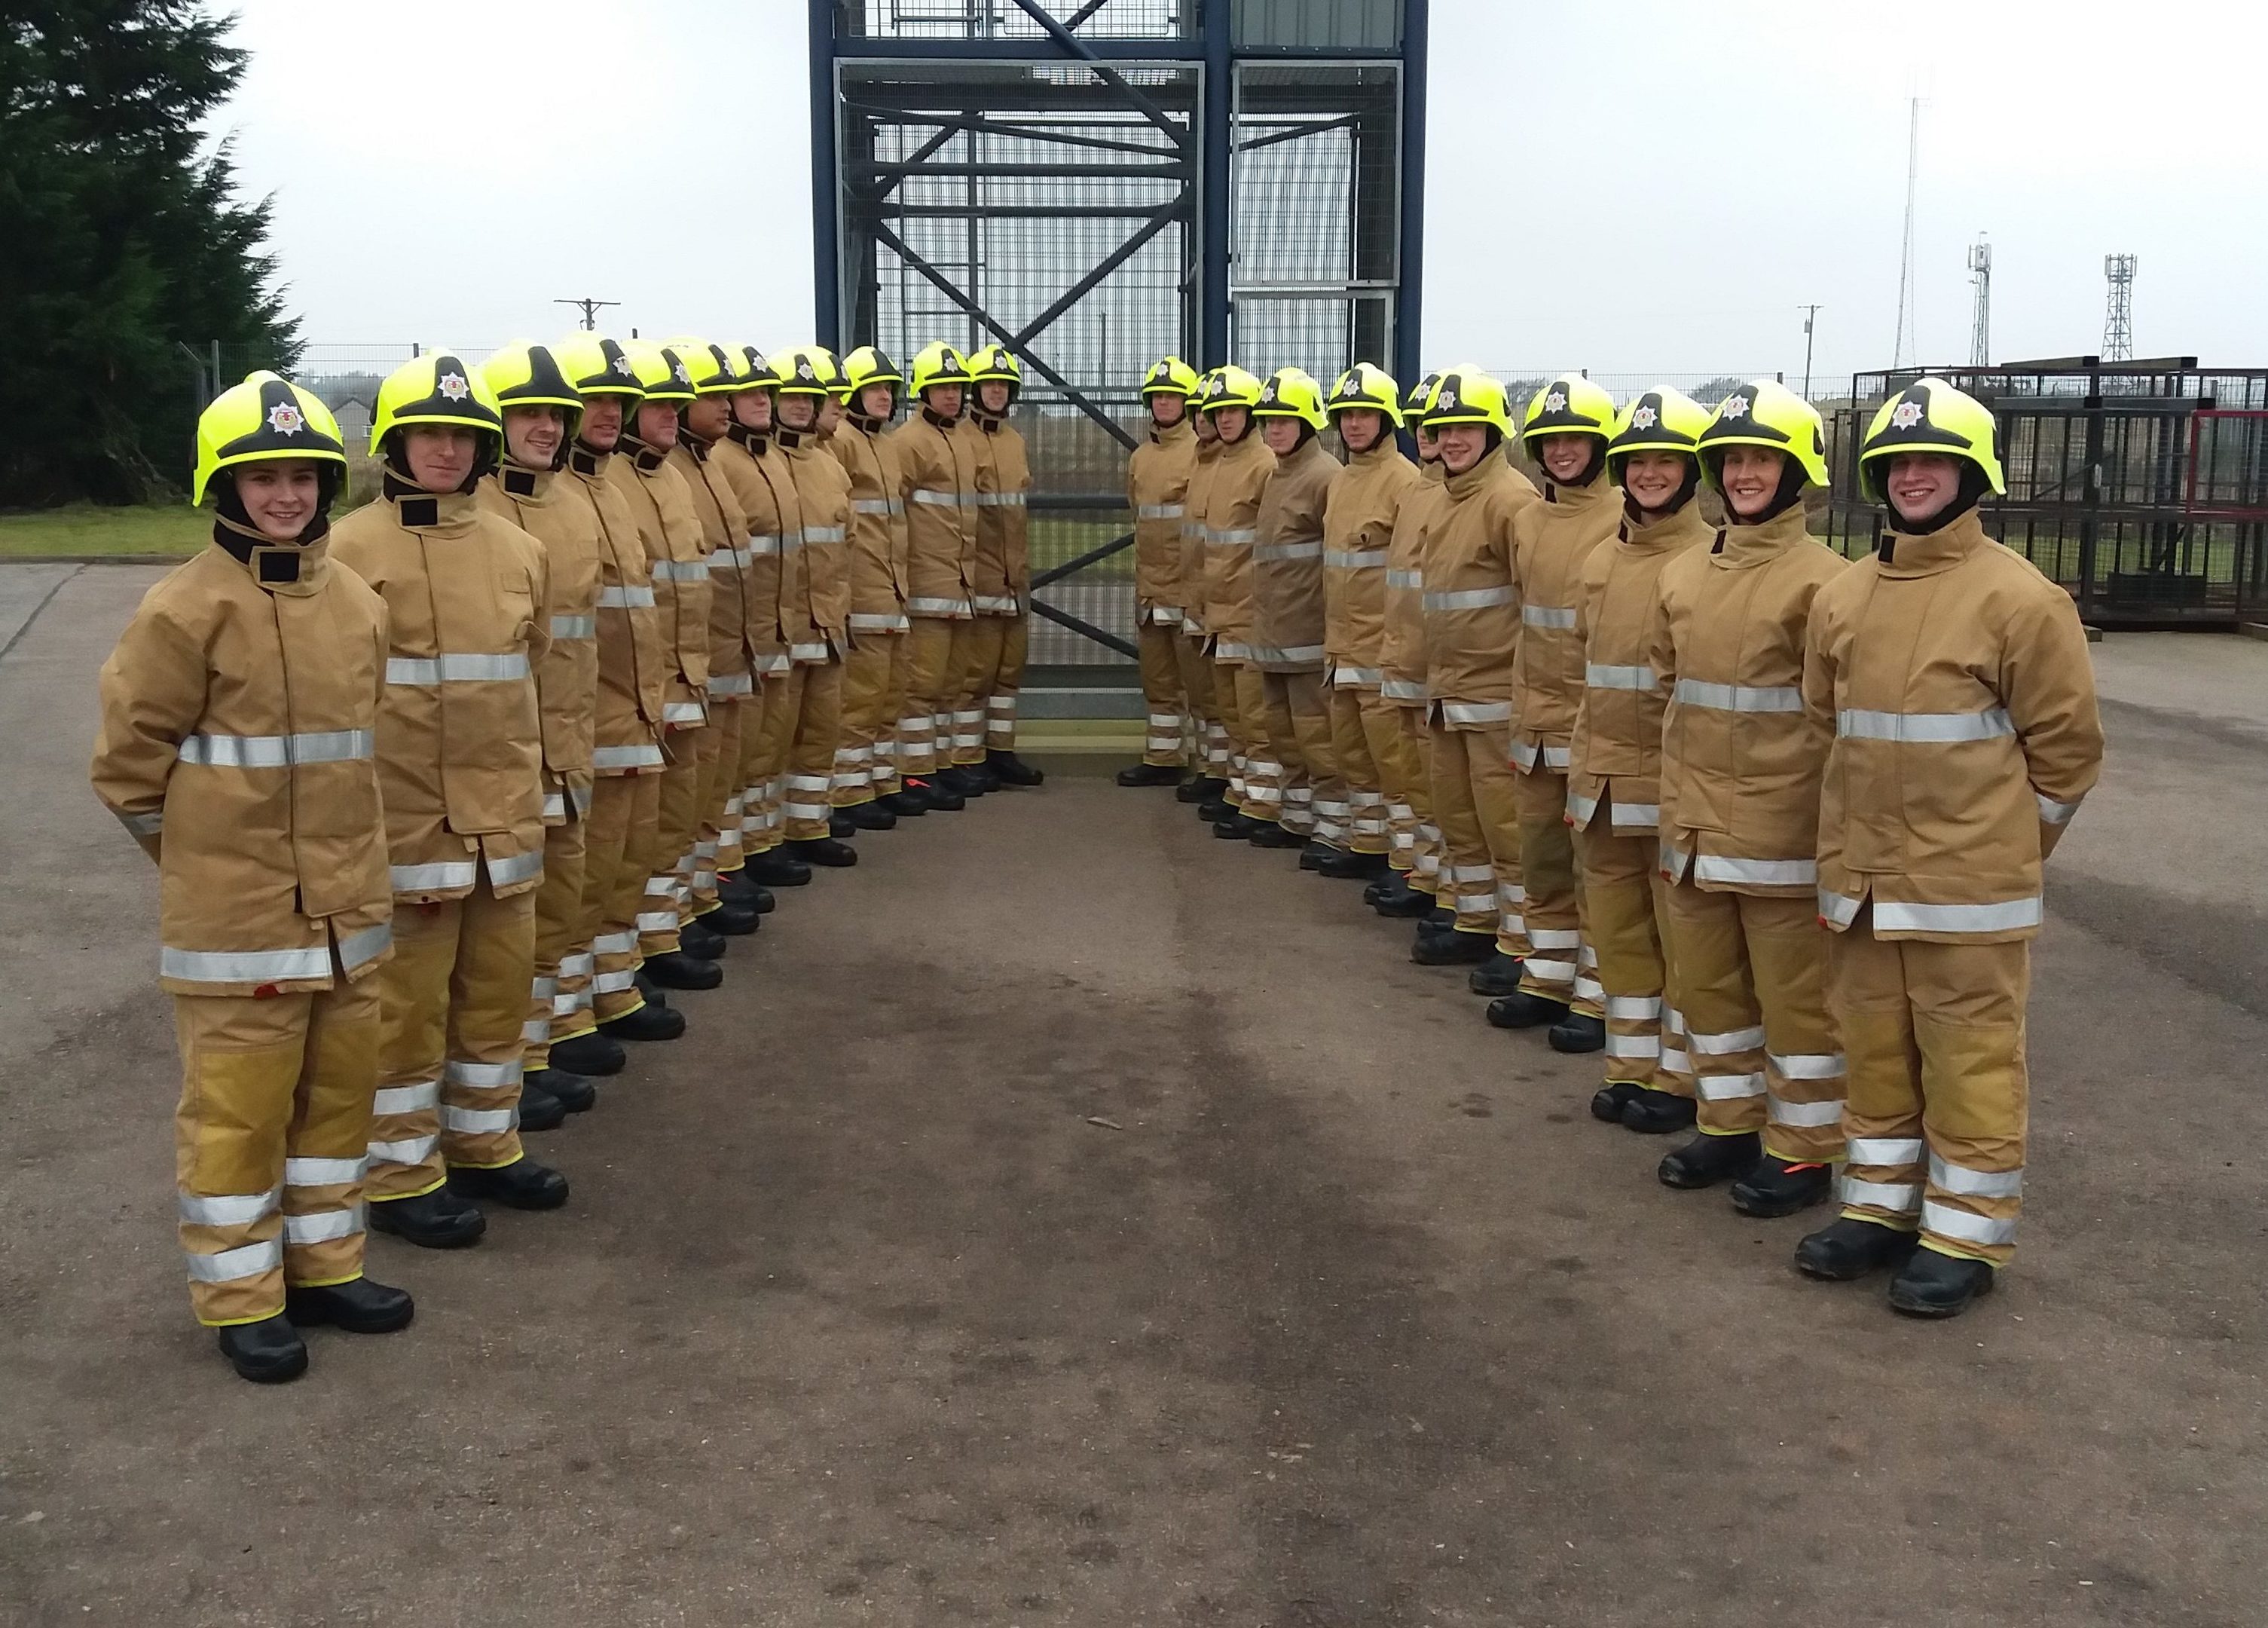 The Portlethen fire and rescue recruits